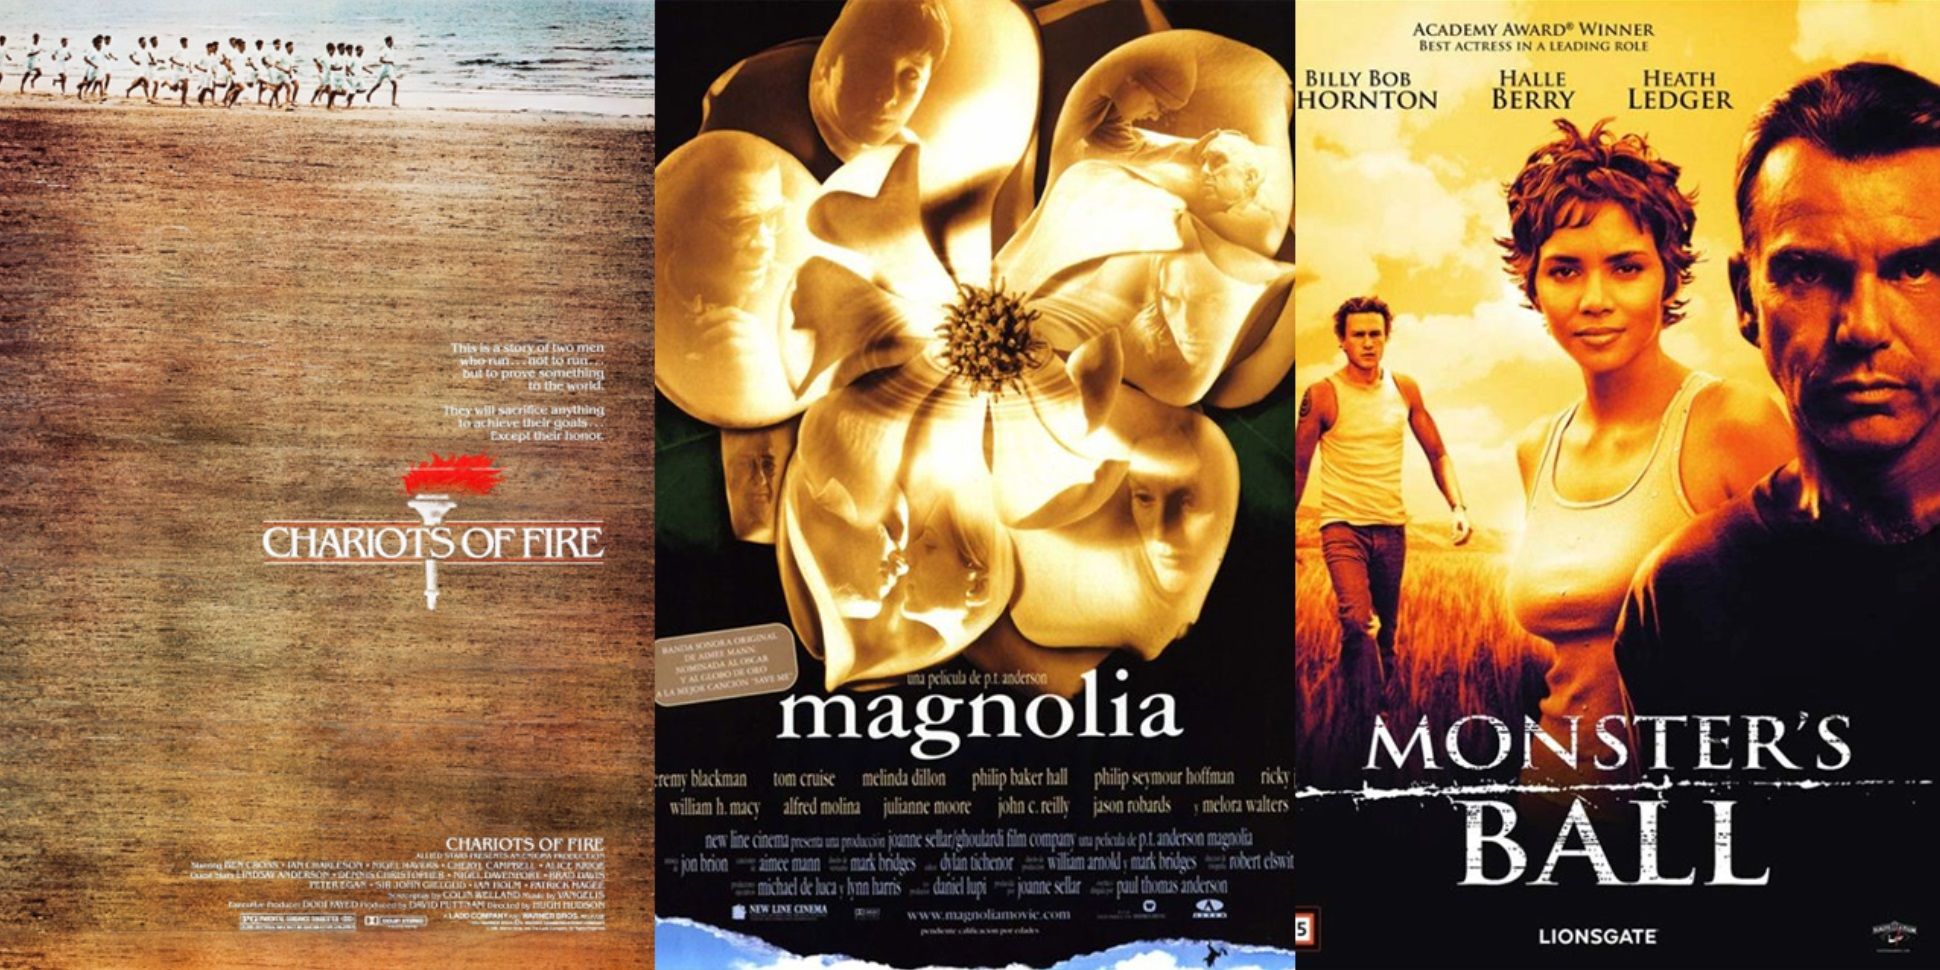 Split image of the posters for Chariots of Fire, Magnolia, and Monster's Ball